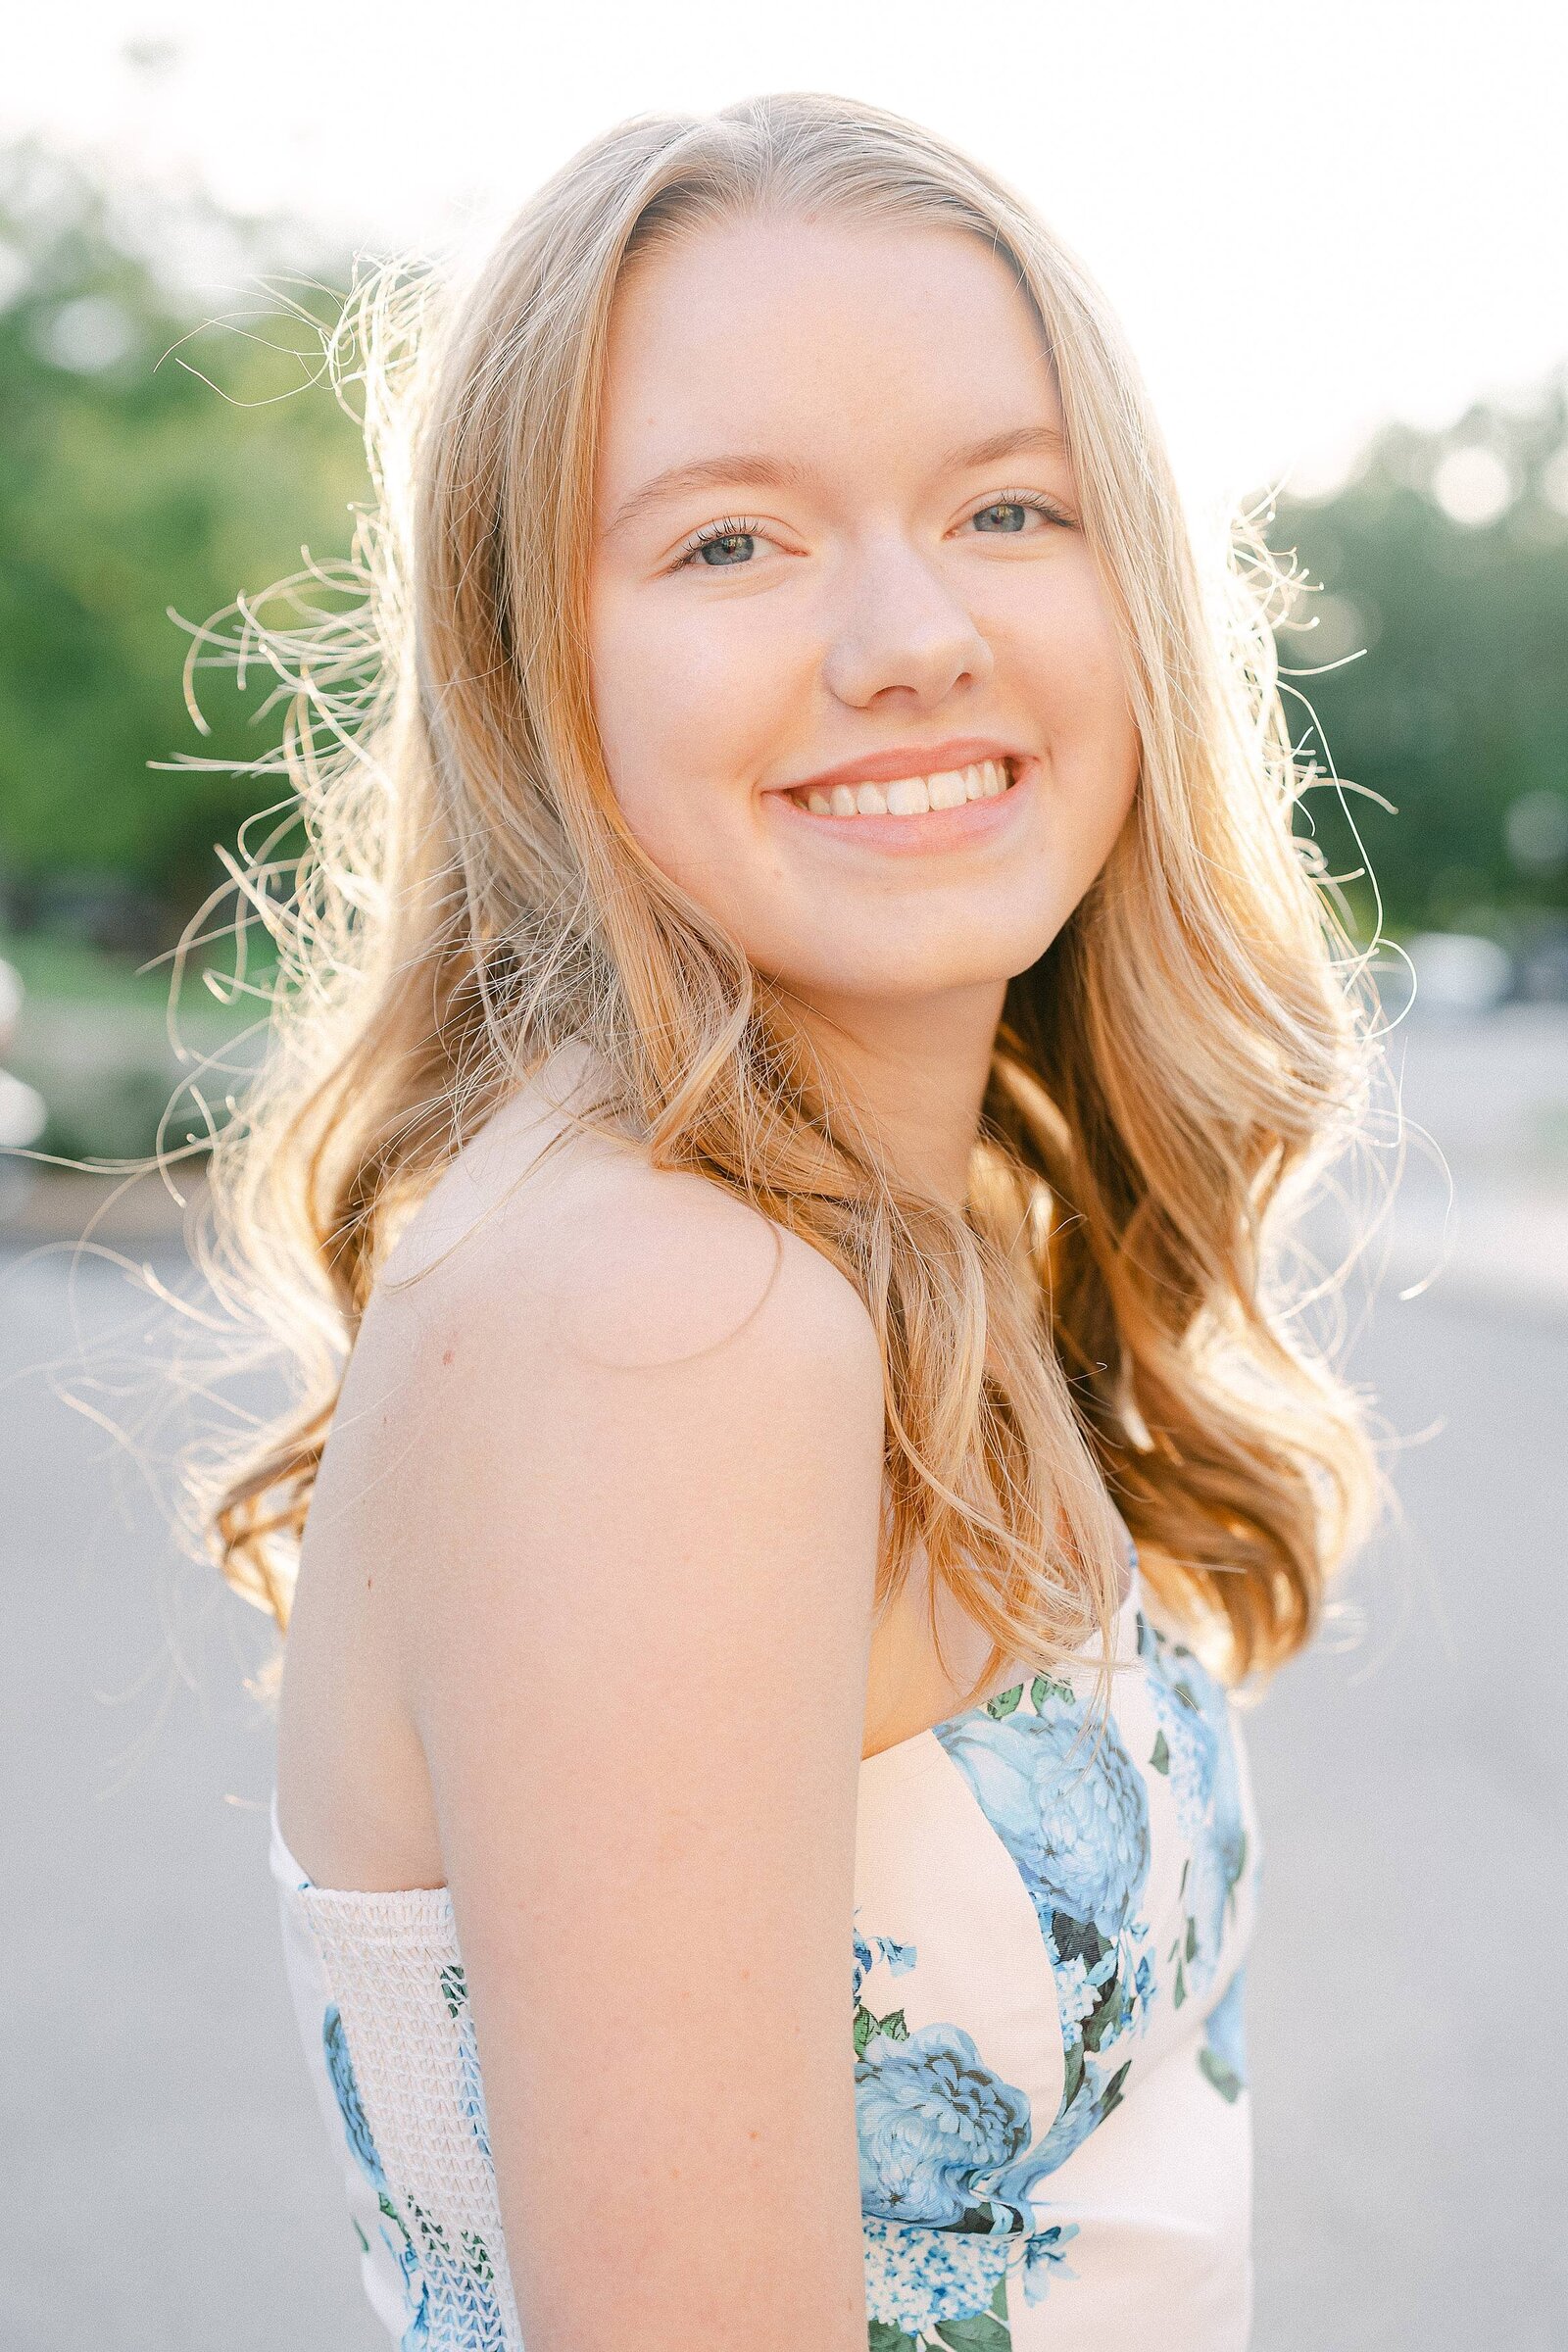 South_Bend_Senior_Photography_Katie_Whitcomb_0009